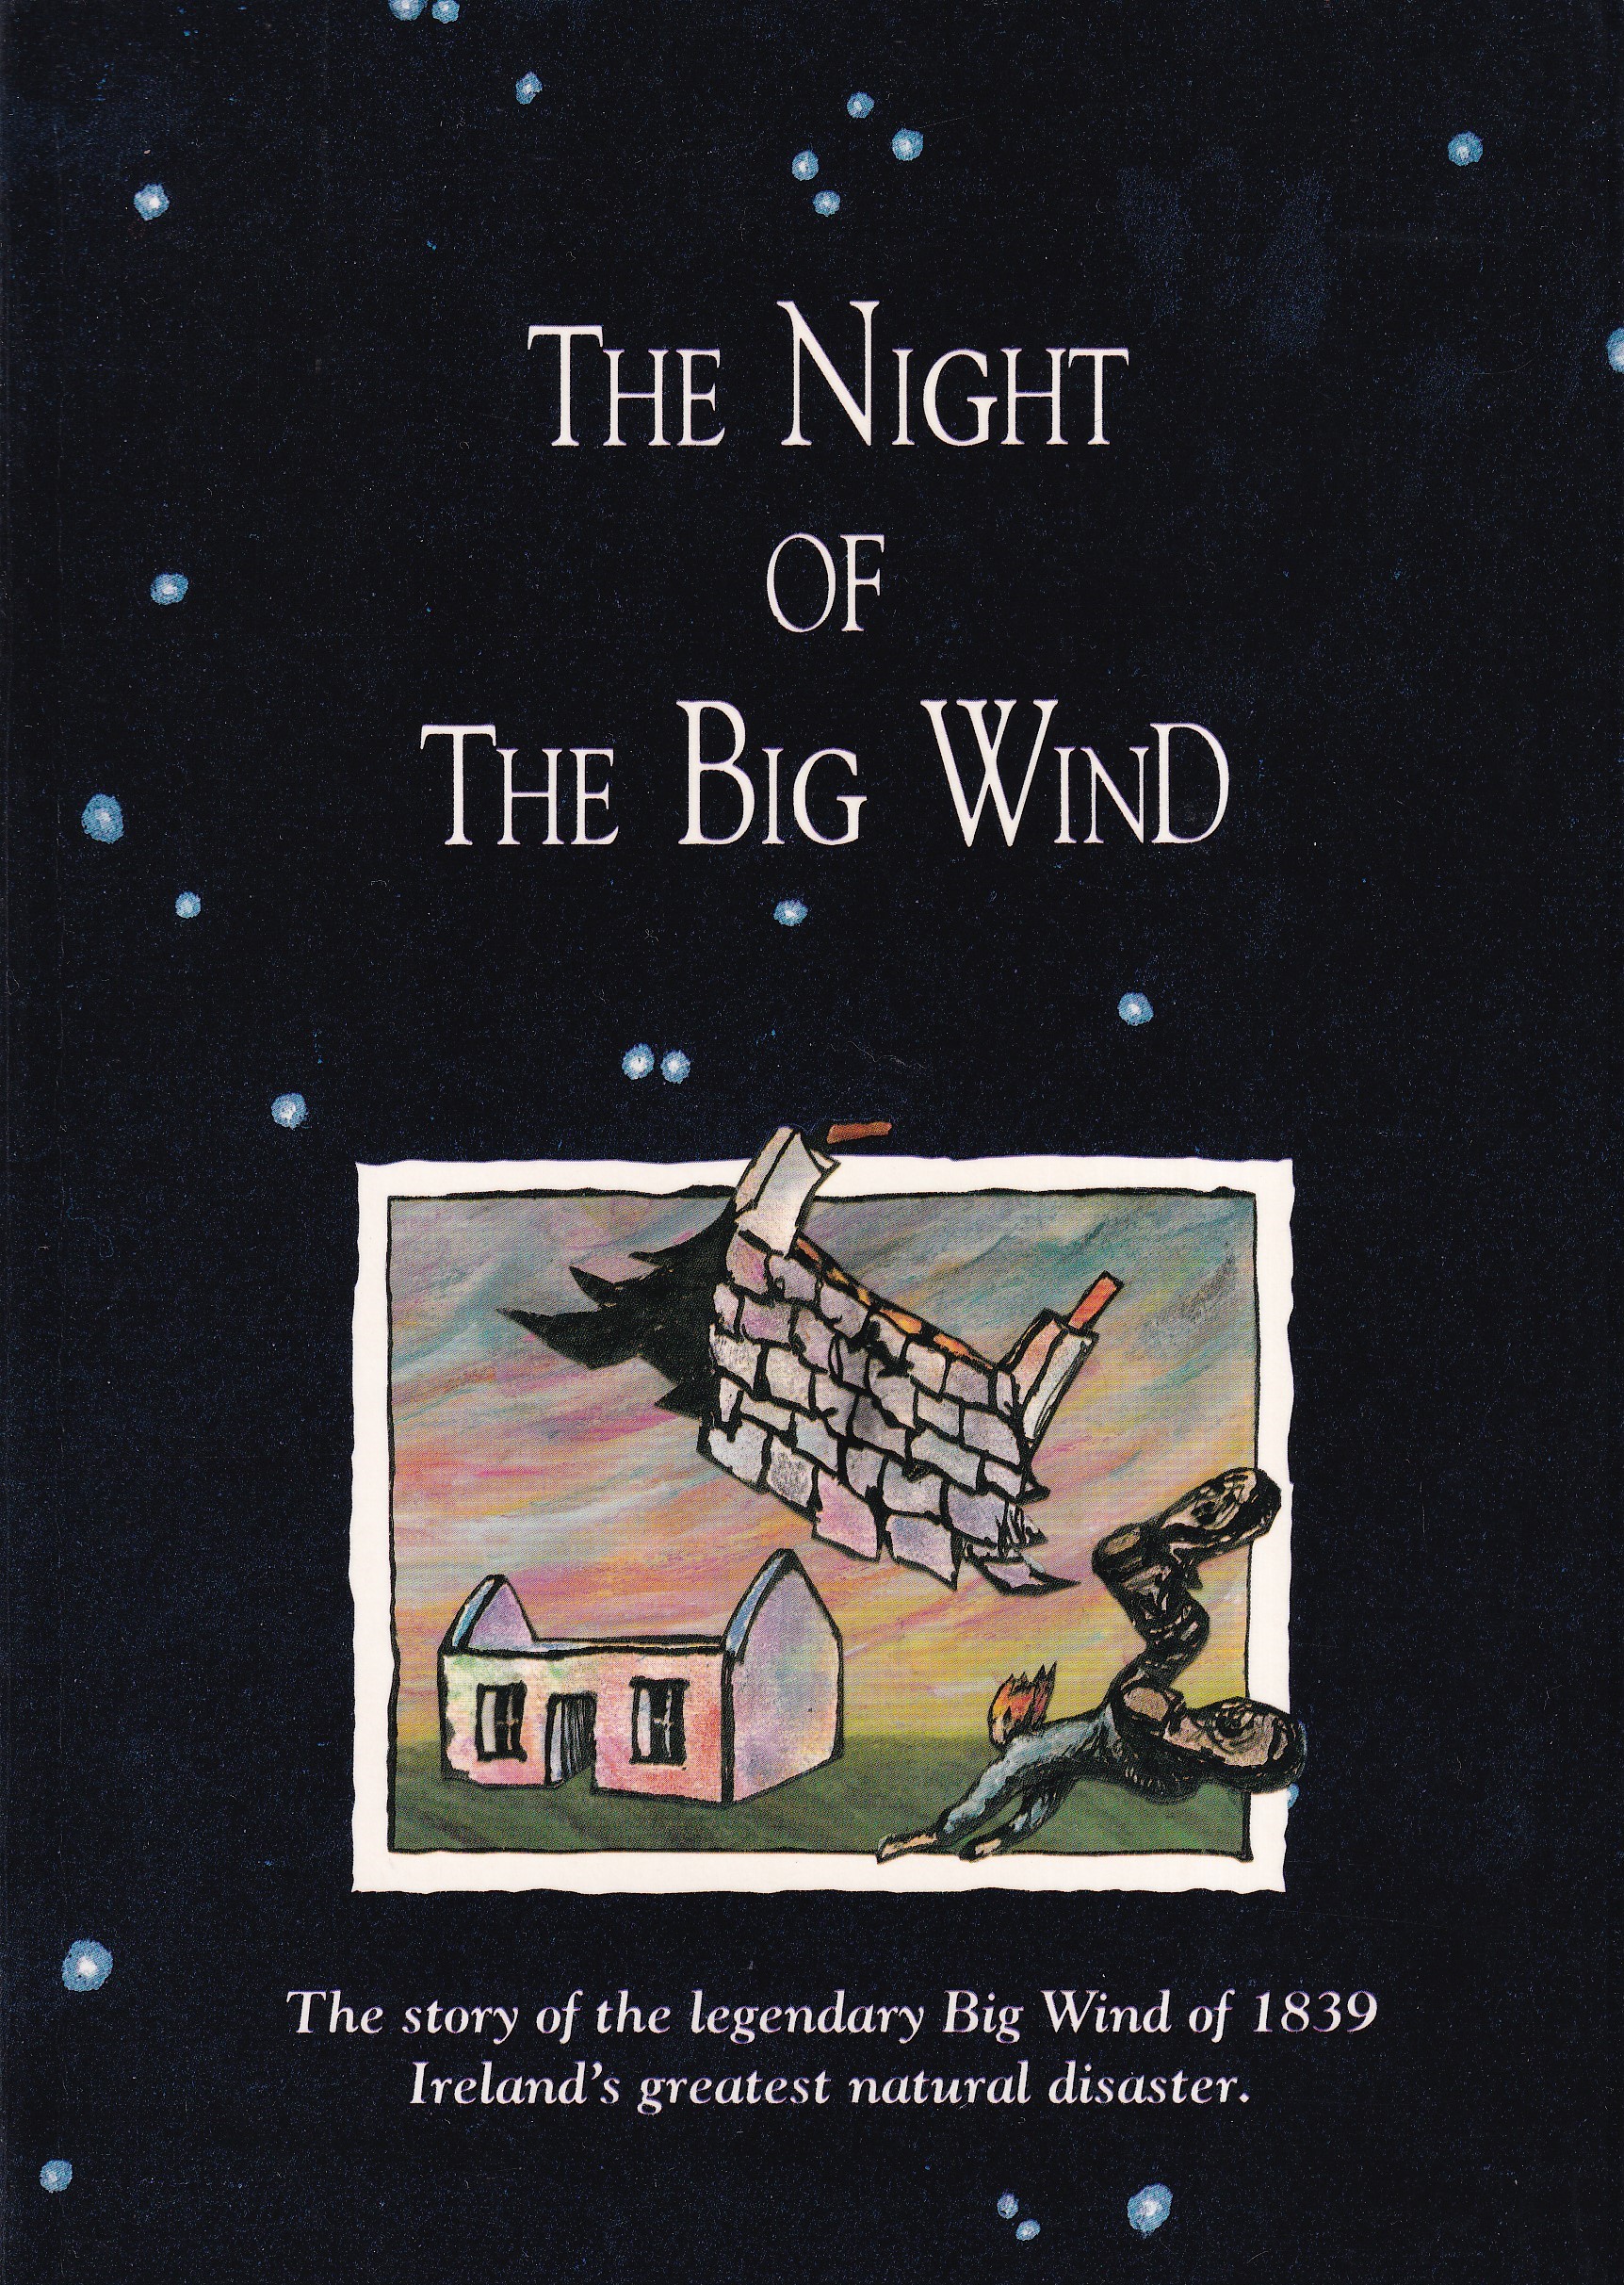 The Night of the Big Wind: The Story of the Legendary Big Wind of 1839 Ireland’s Greatest Natural Disaster by Peter Carr